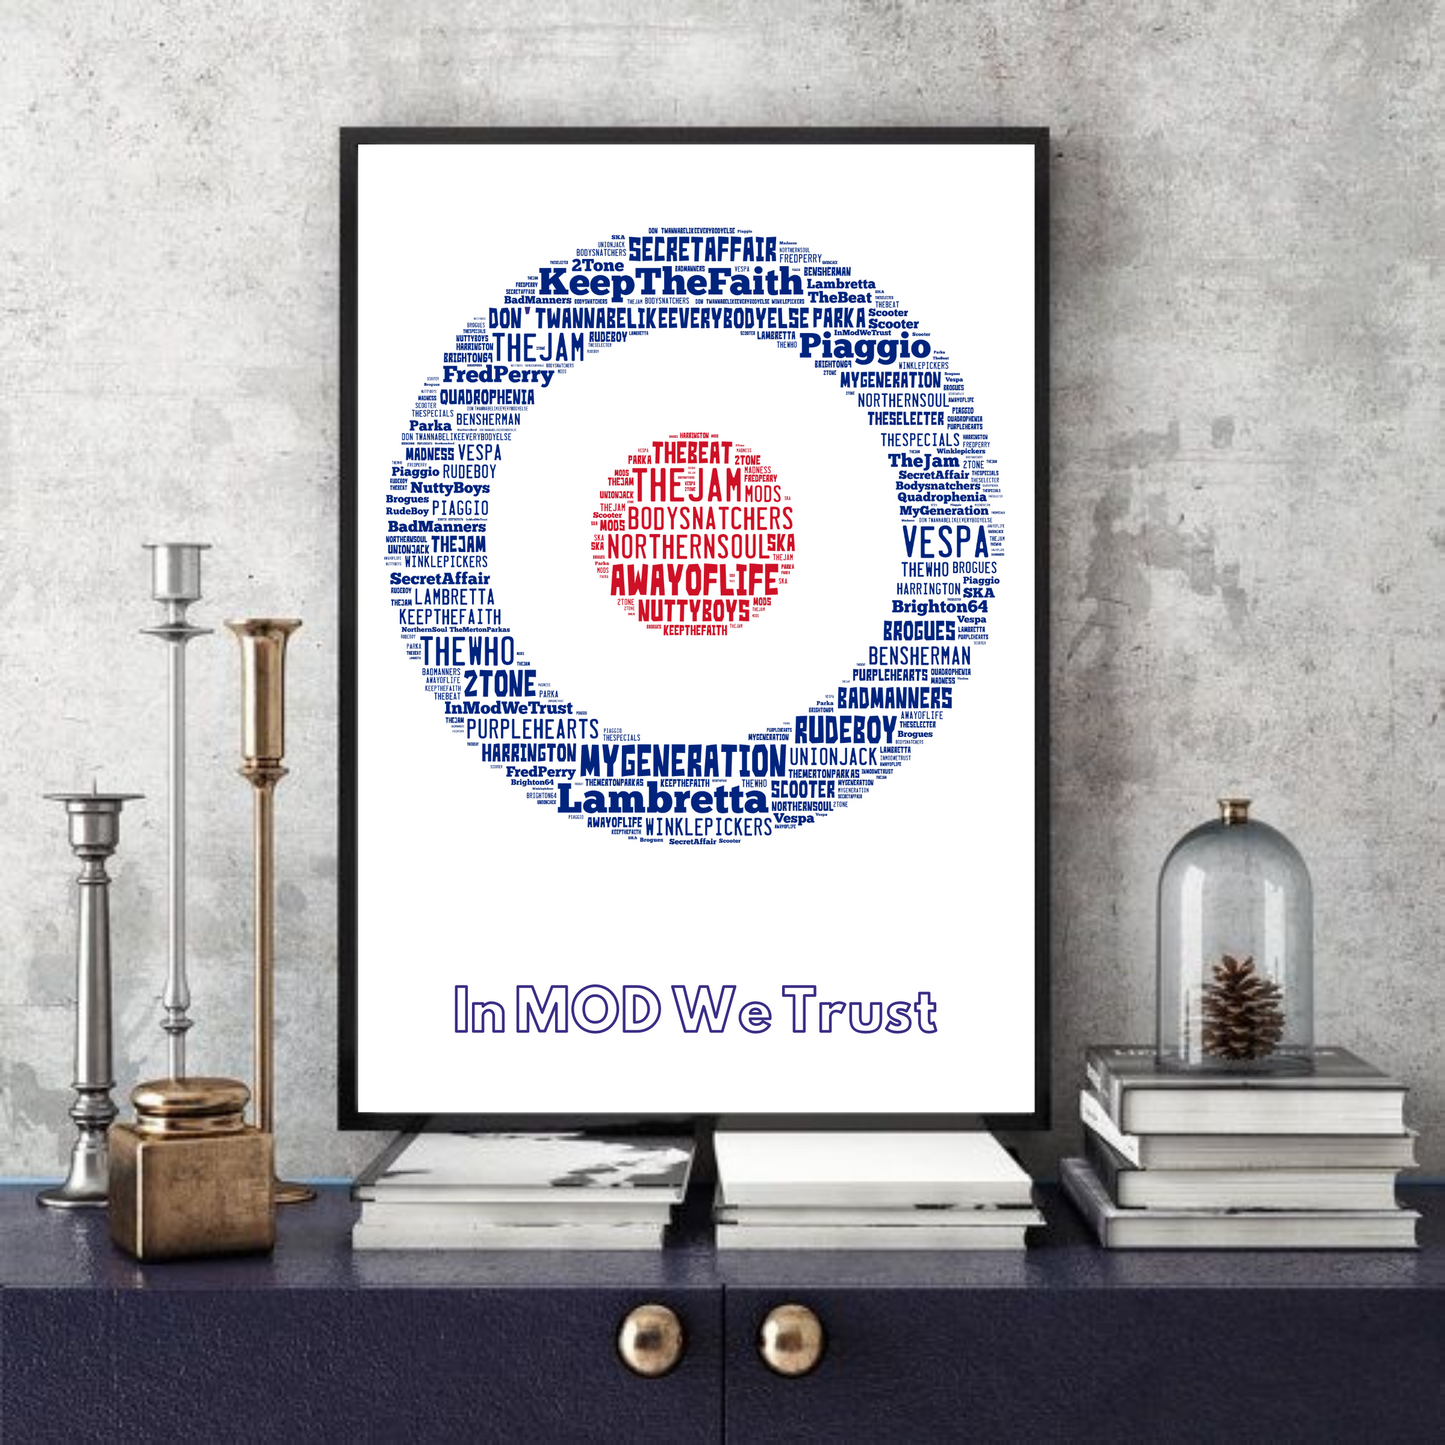 In Mod we trust / 'It's a way of life' Mods - Typography Print